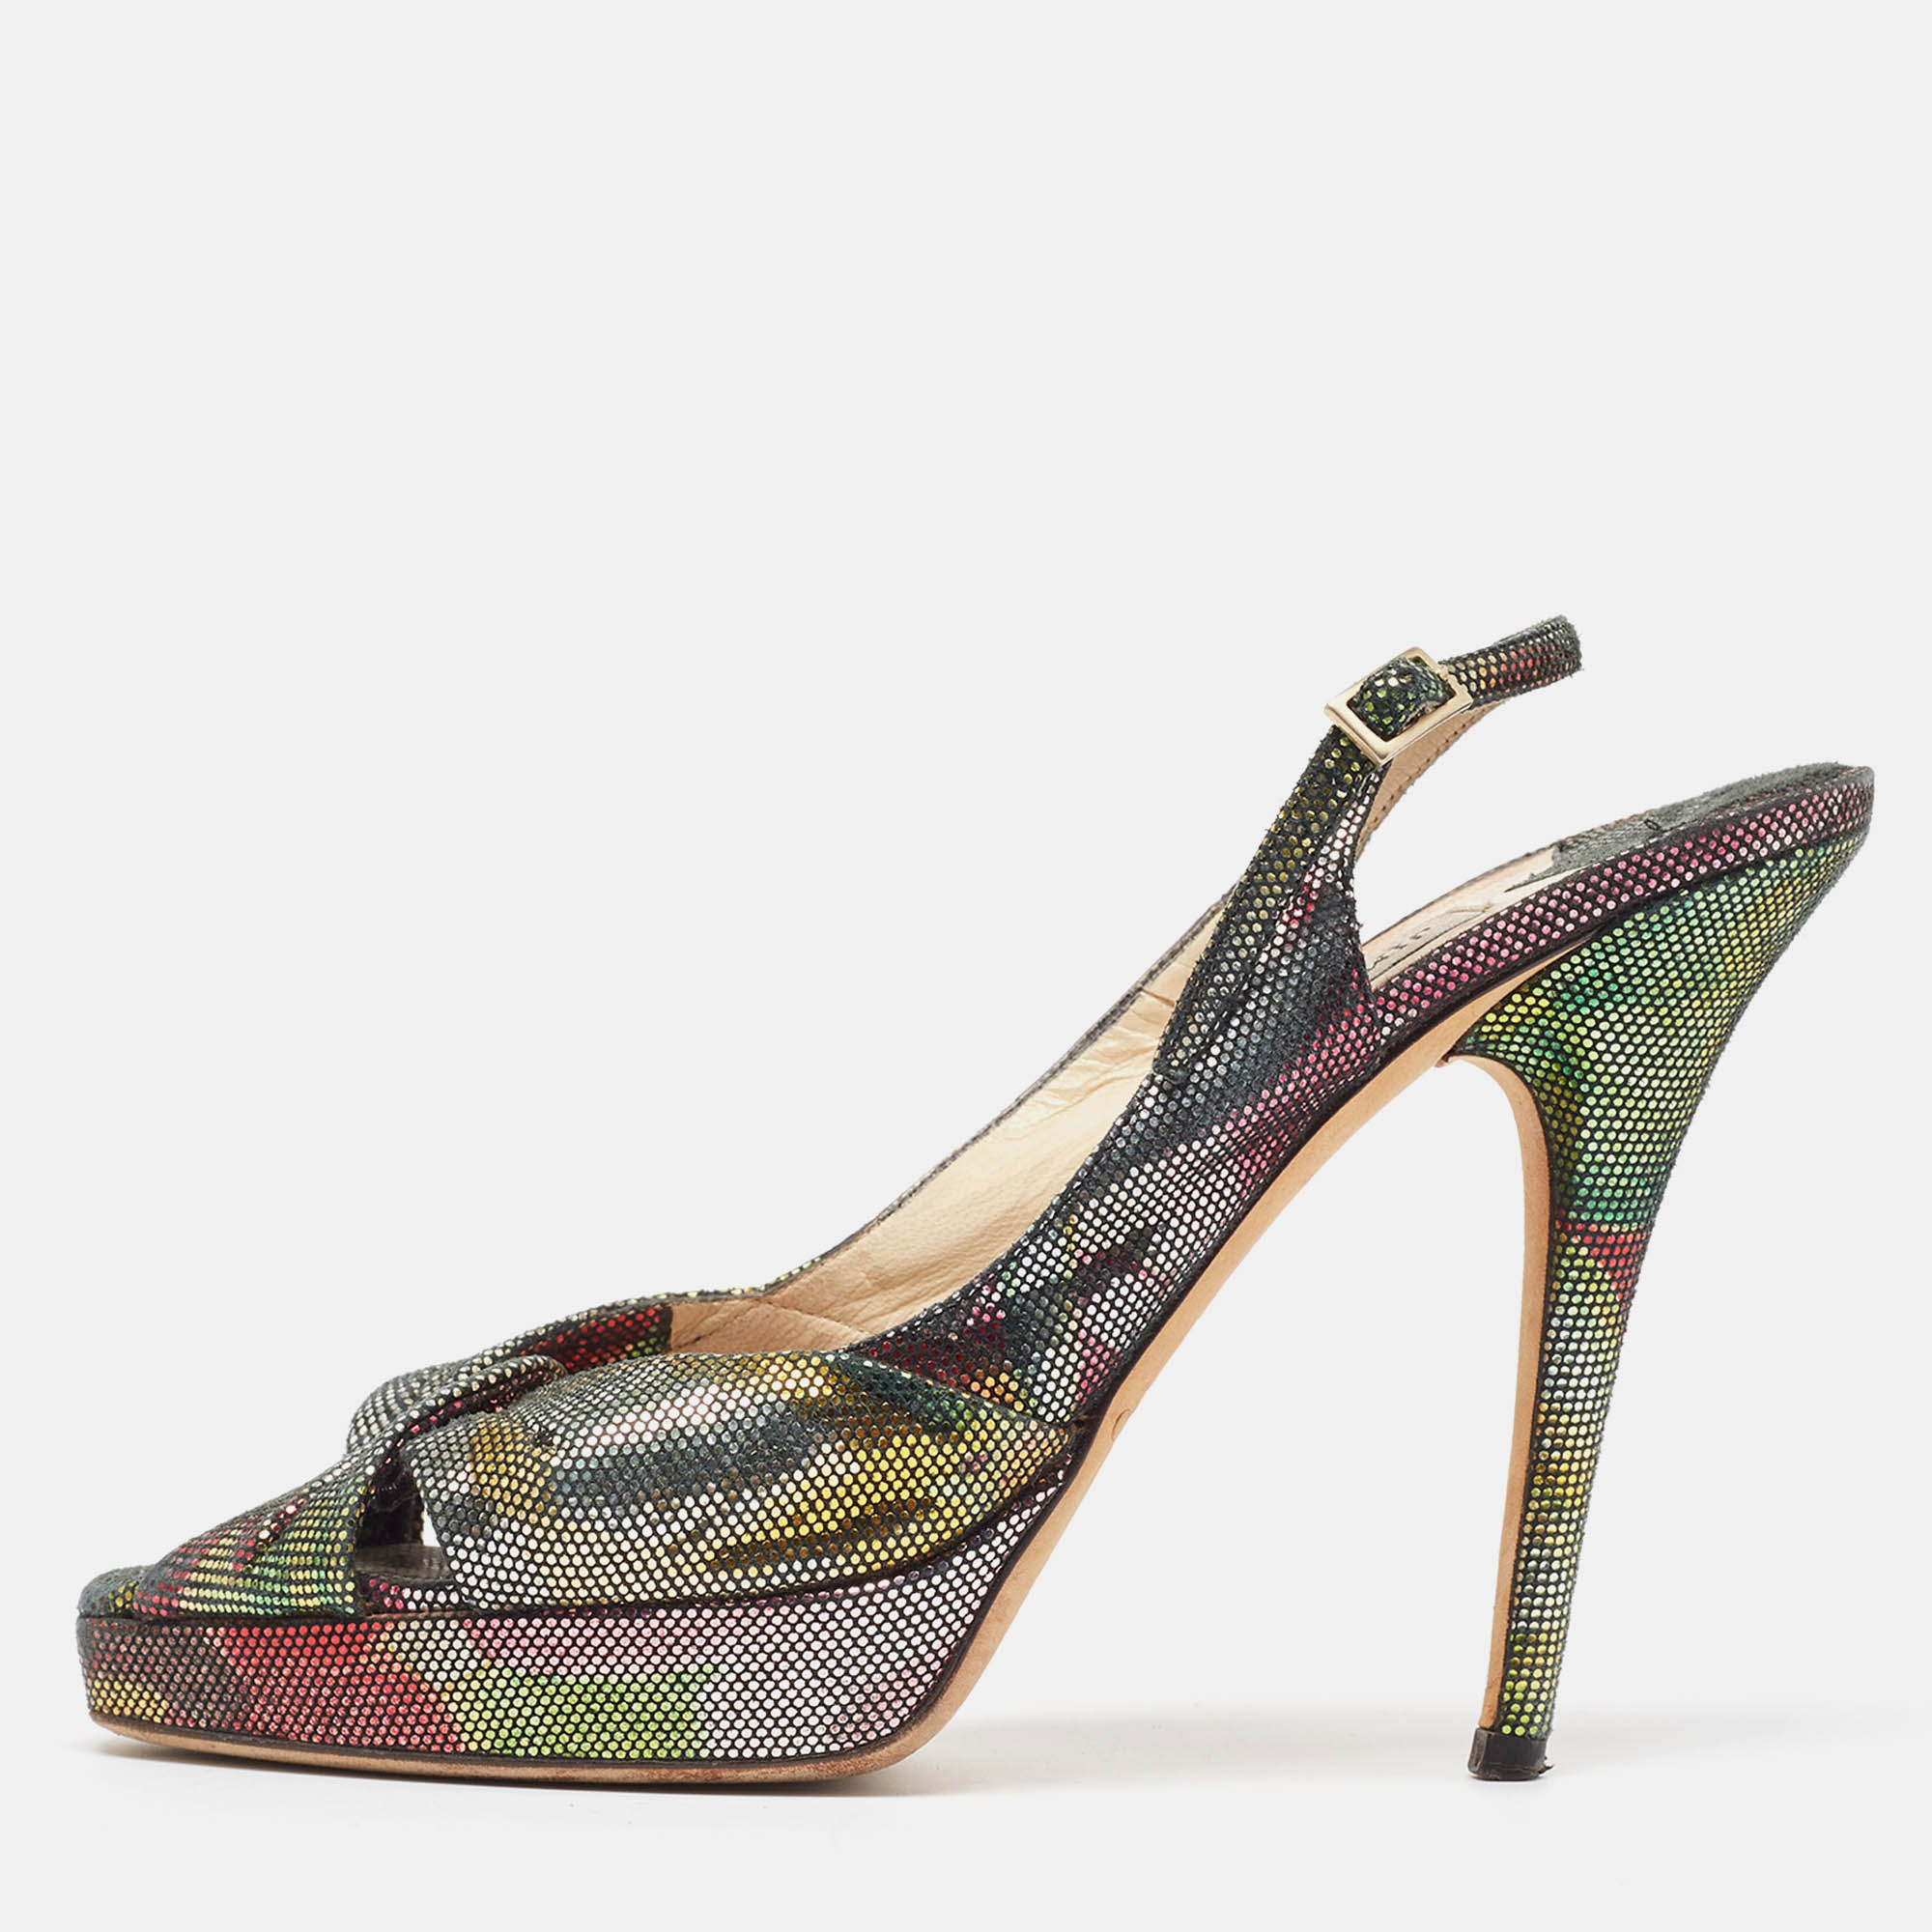 Pre-owned Jimmy Choo Multicolor Texture Suede Peep Toe Slingback Pumps Size 38